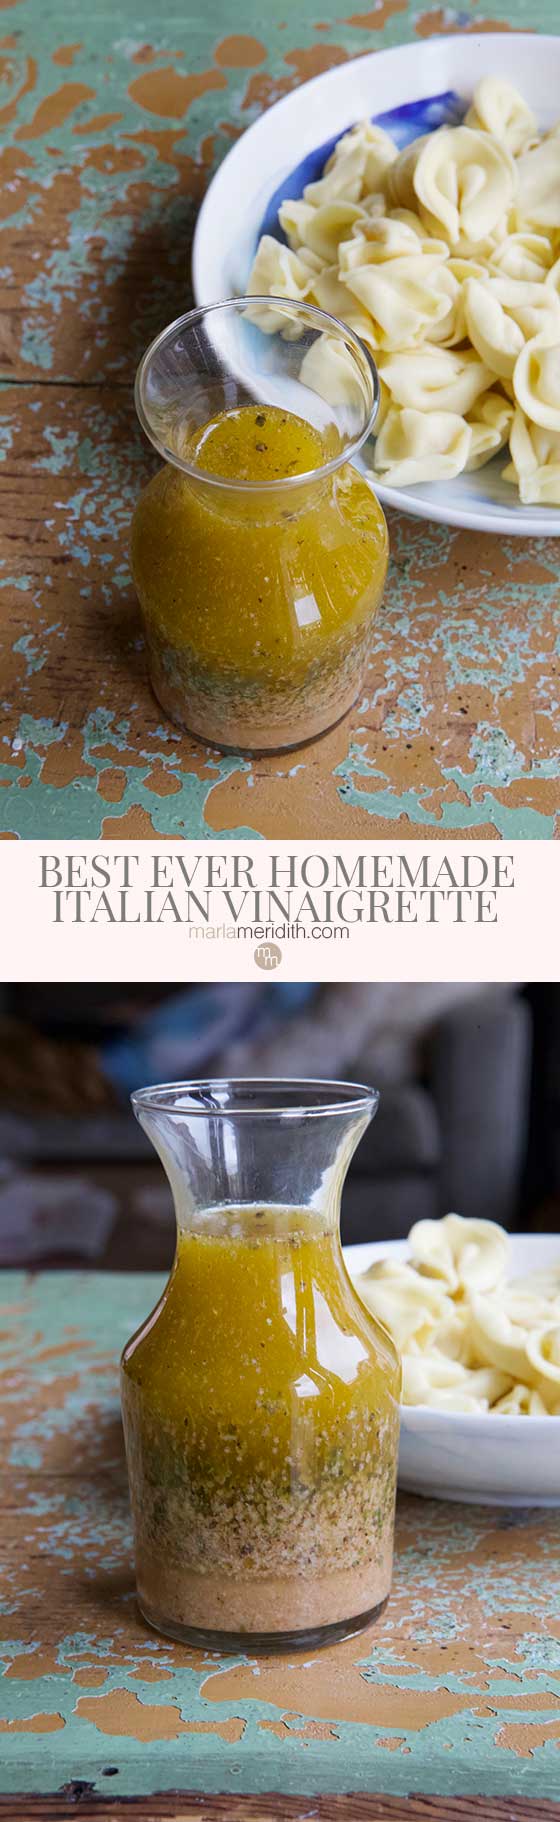 Best Ever Italian Vinaigrette recipe, use this salad dressing on everything from pasta salads to green salads to marinating vegetables, meats and seafood. MarlaMeridith.com